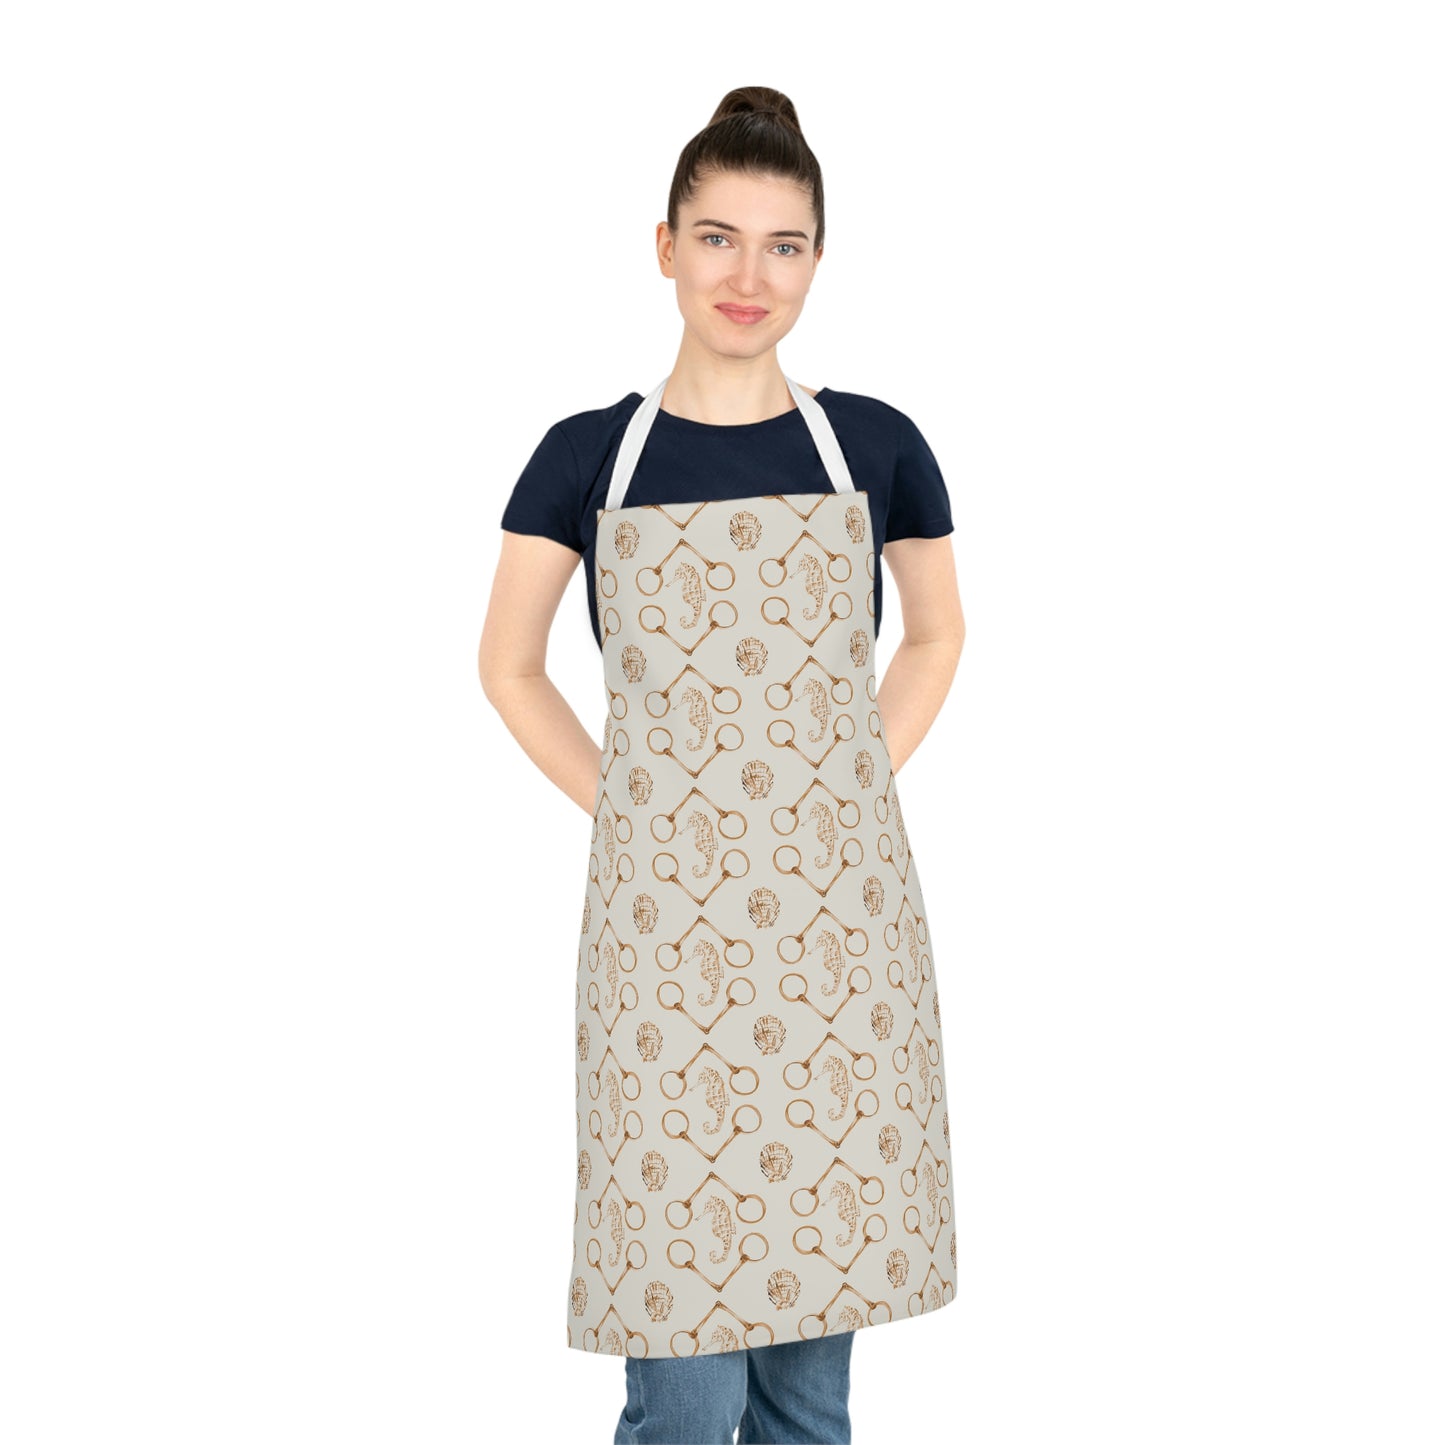 Sea horse and bits Adult Apron- spice